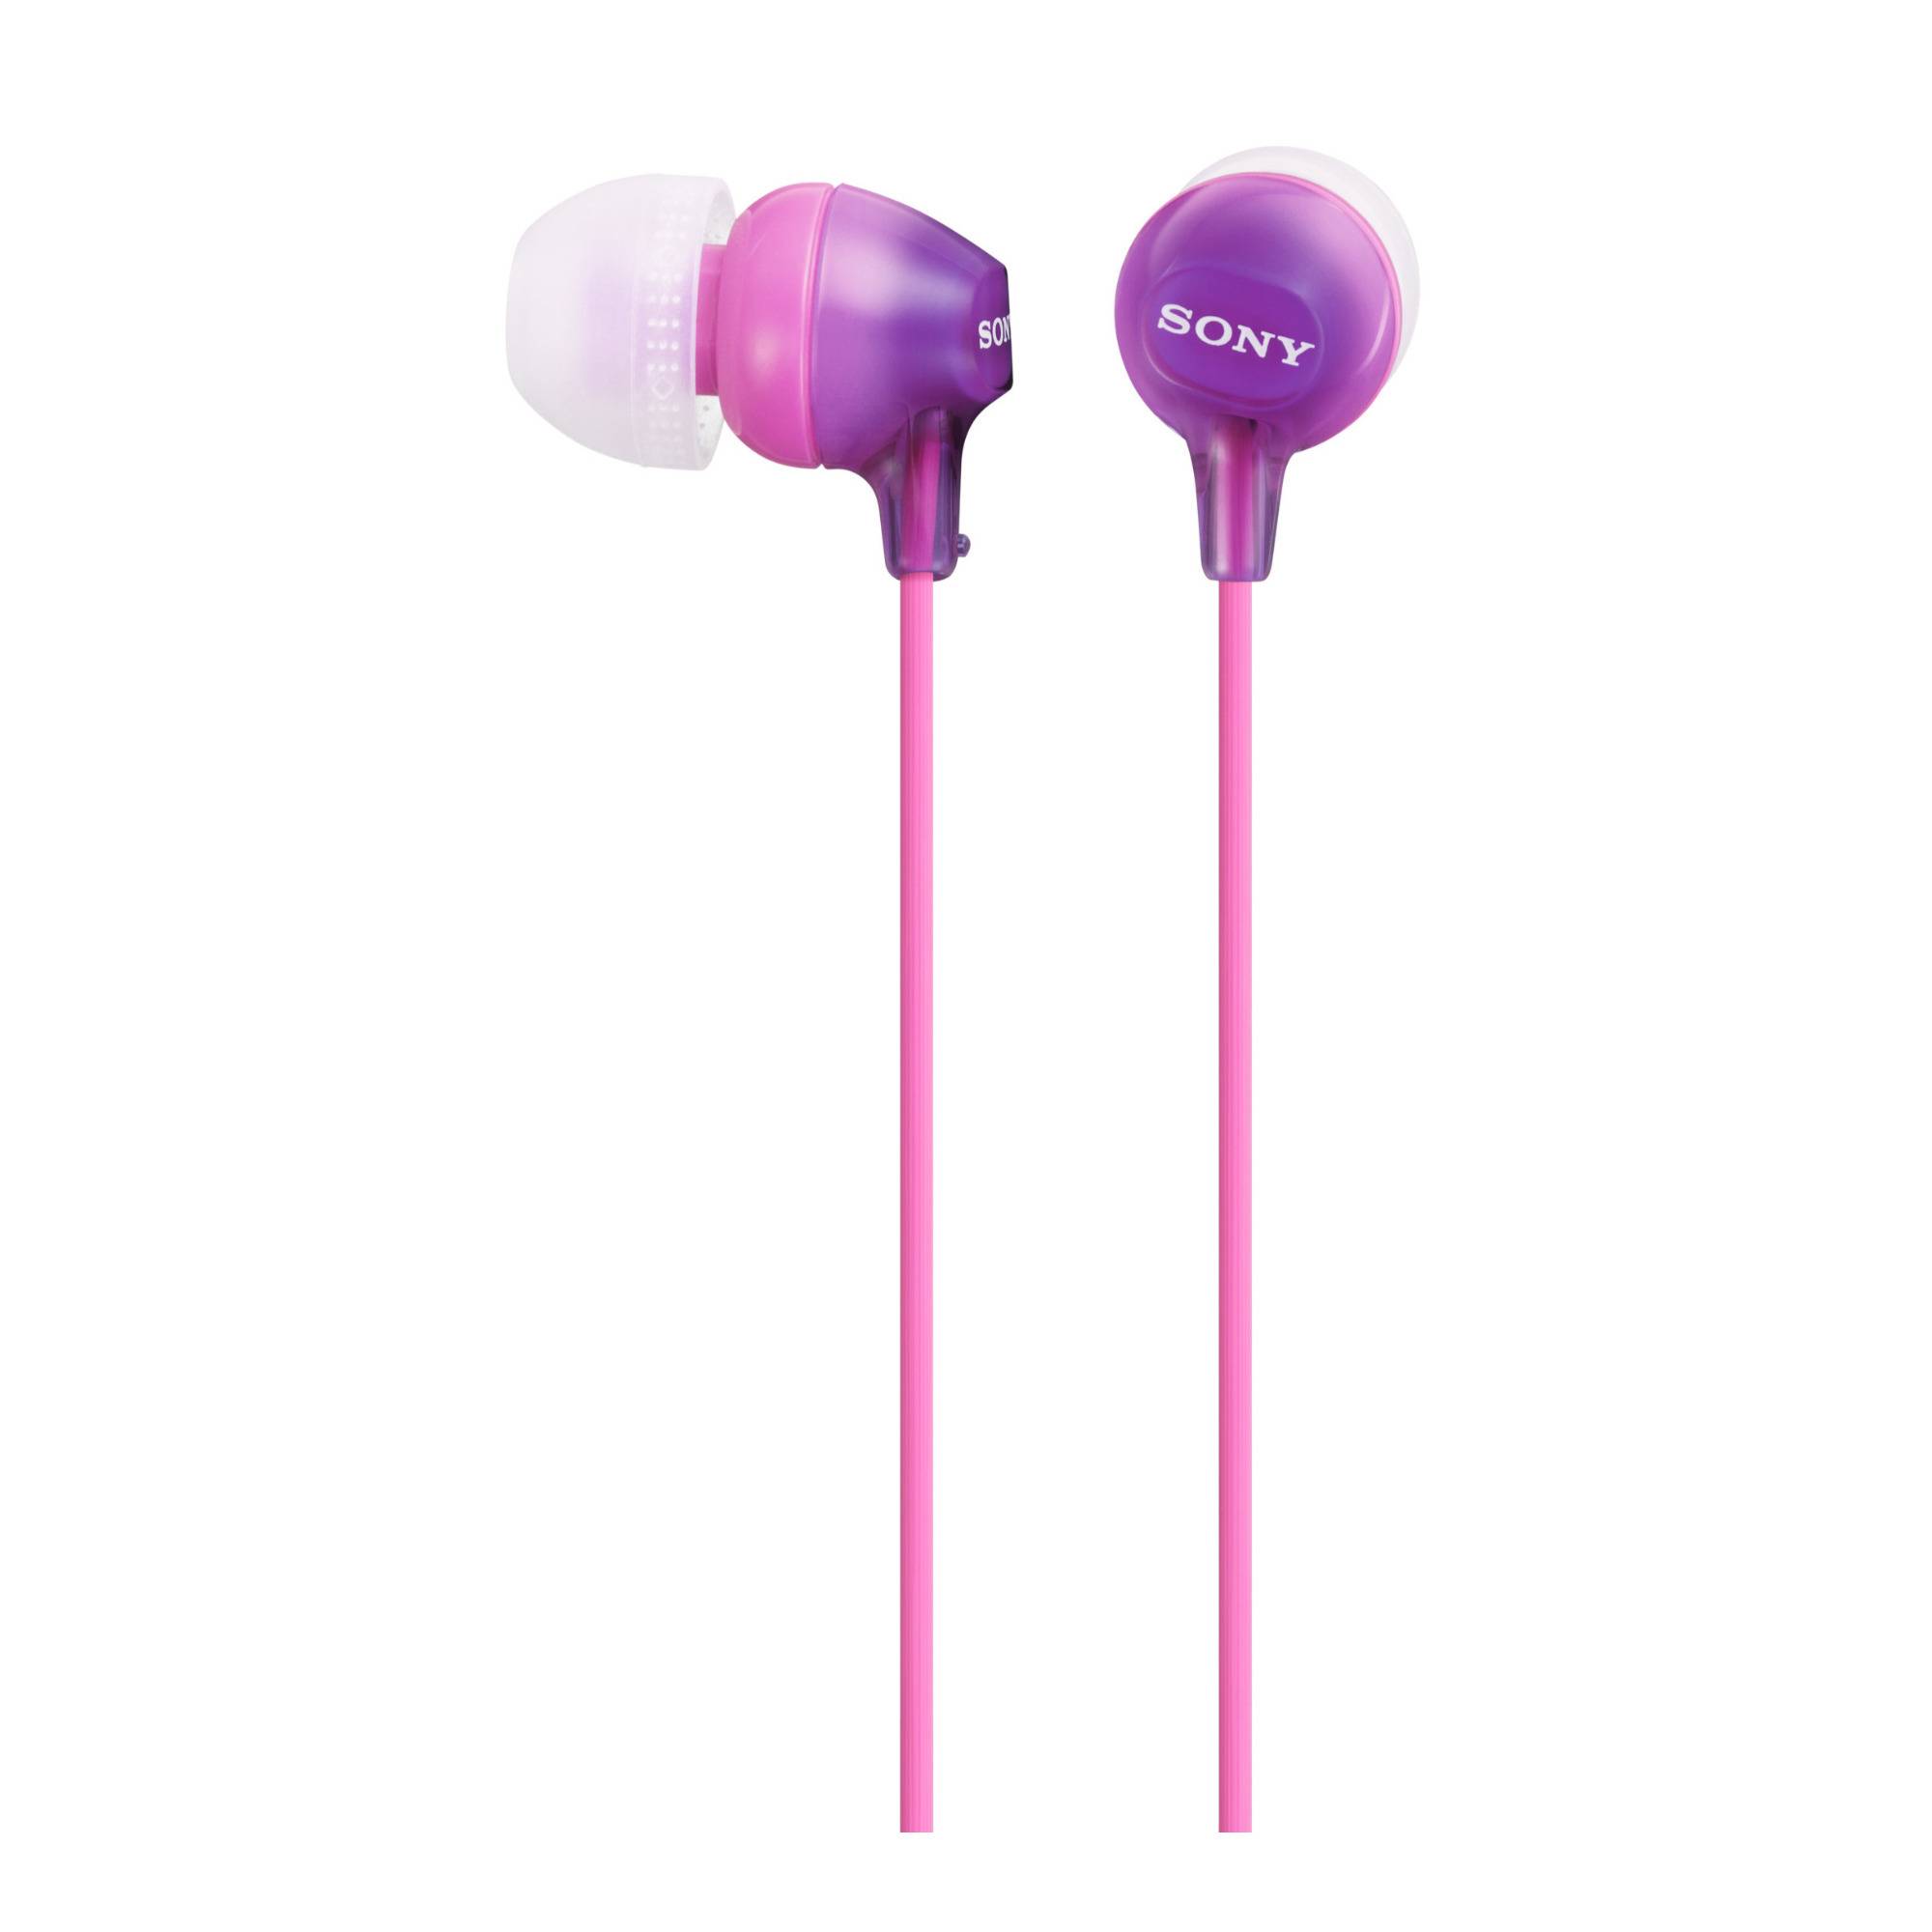 Sony MDR-EX15LP Fashion Color EX Series In-Ear Earbud Headphones (Violet)